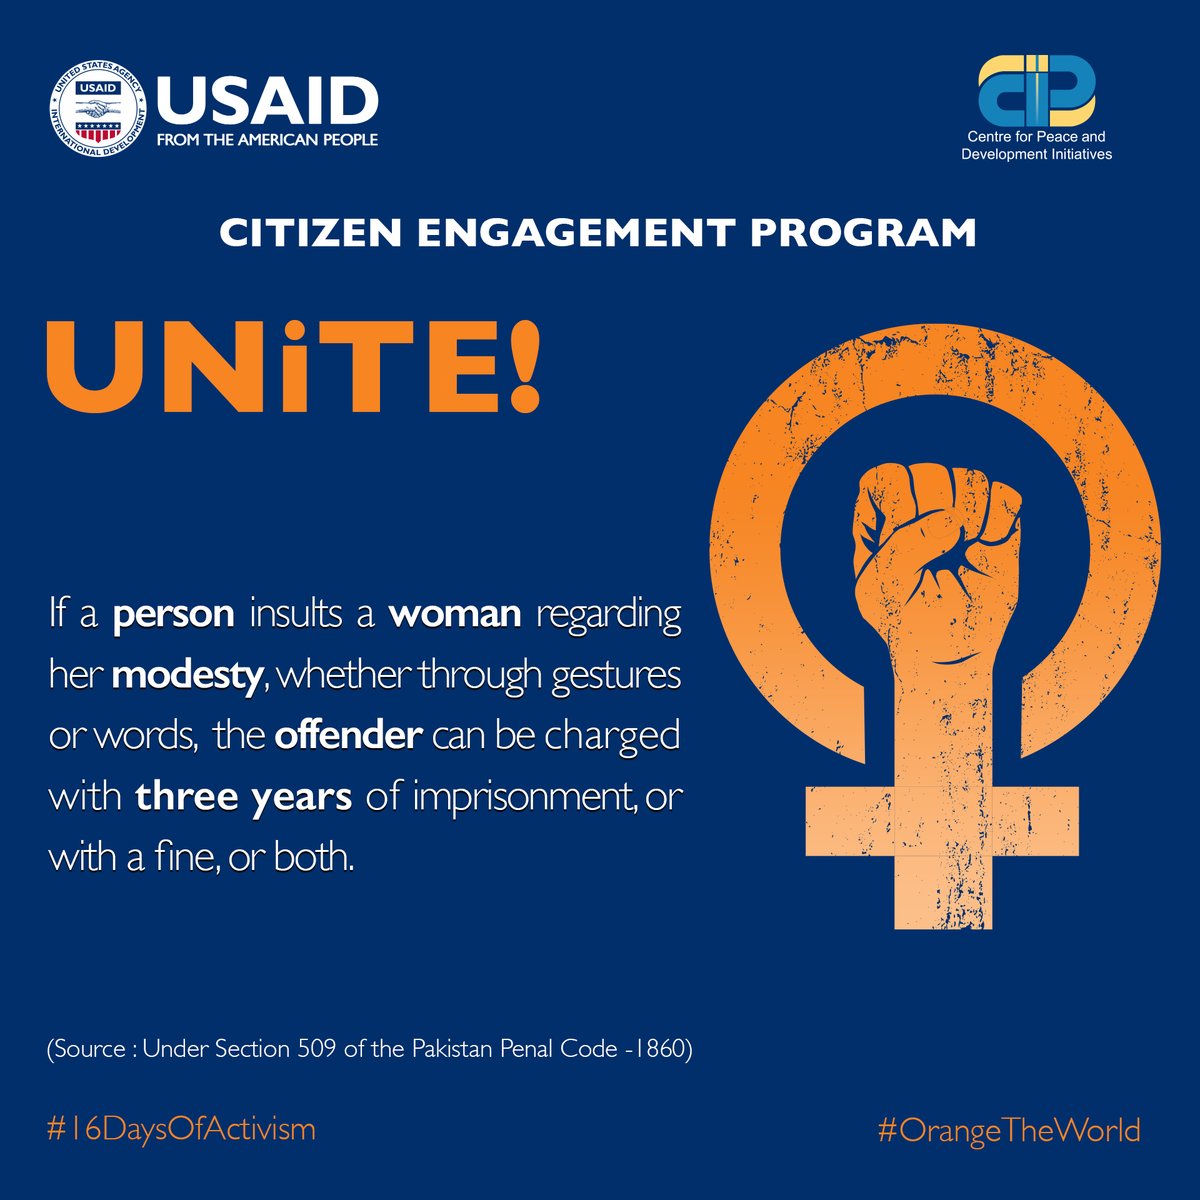 Respect as a rule! Insults to a woman's modesty have consequences. Let's unite for a society where respect prevails, ensuring consequences for those who violate it. ⚖️ 
#USAID4Impact #Change4Impact #Unite4Impact #Act4Impact #RespectForAll